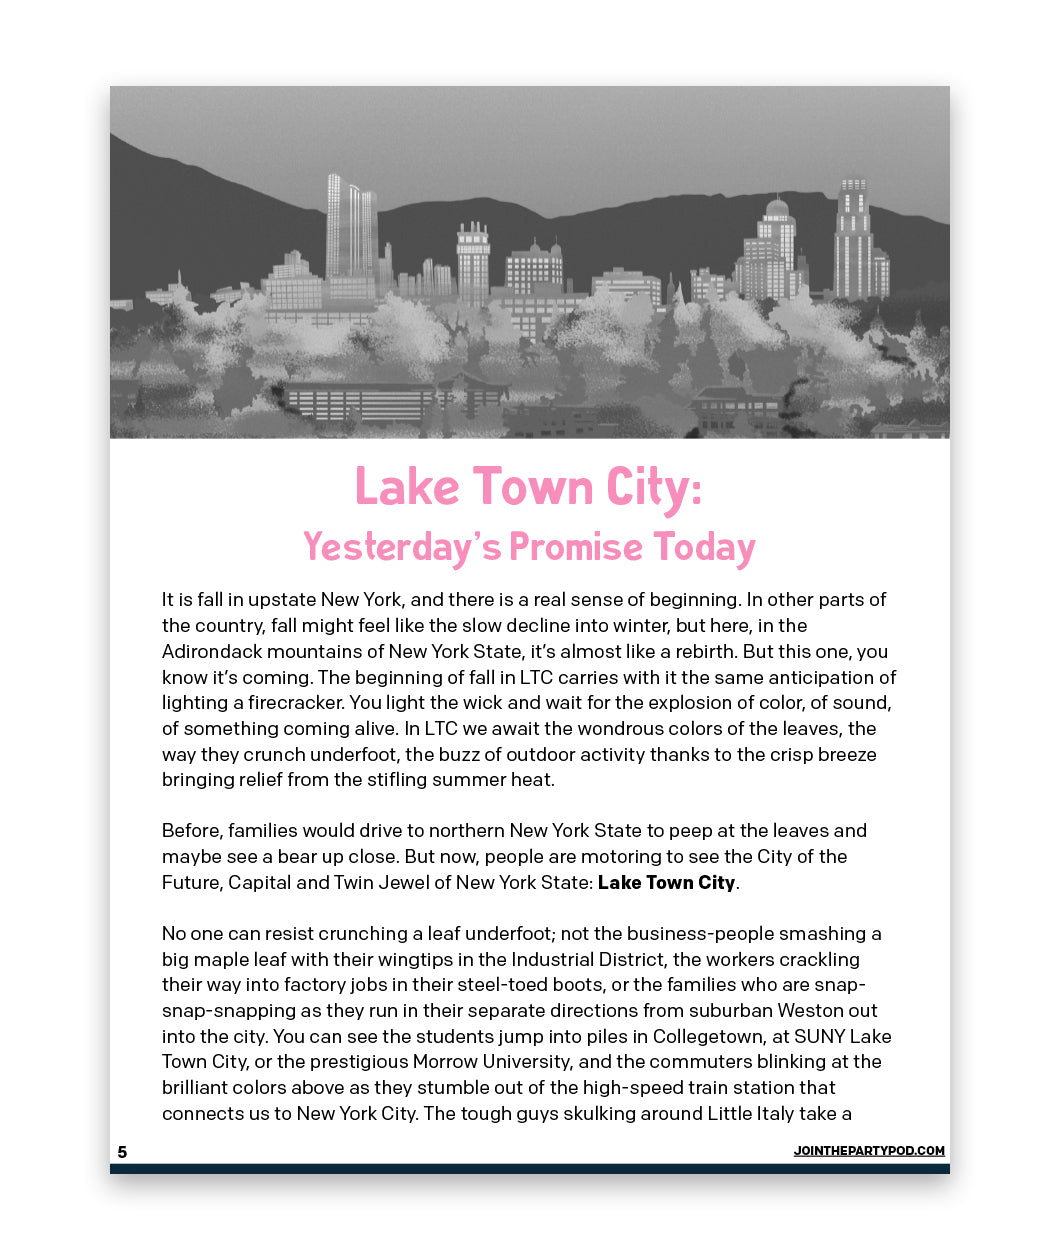 Hello, Lake Town City: A Superpowered City Worldbook